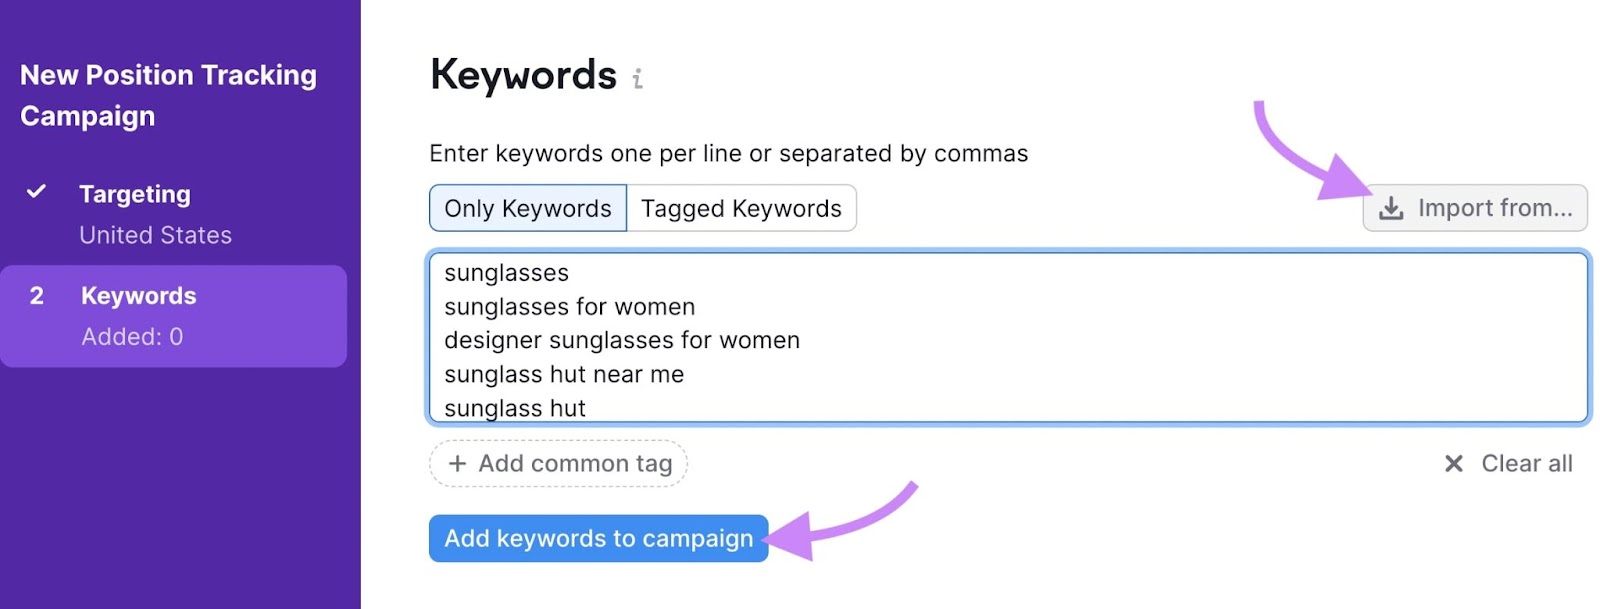 "Keywords" window in Position Tracking Settings